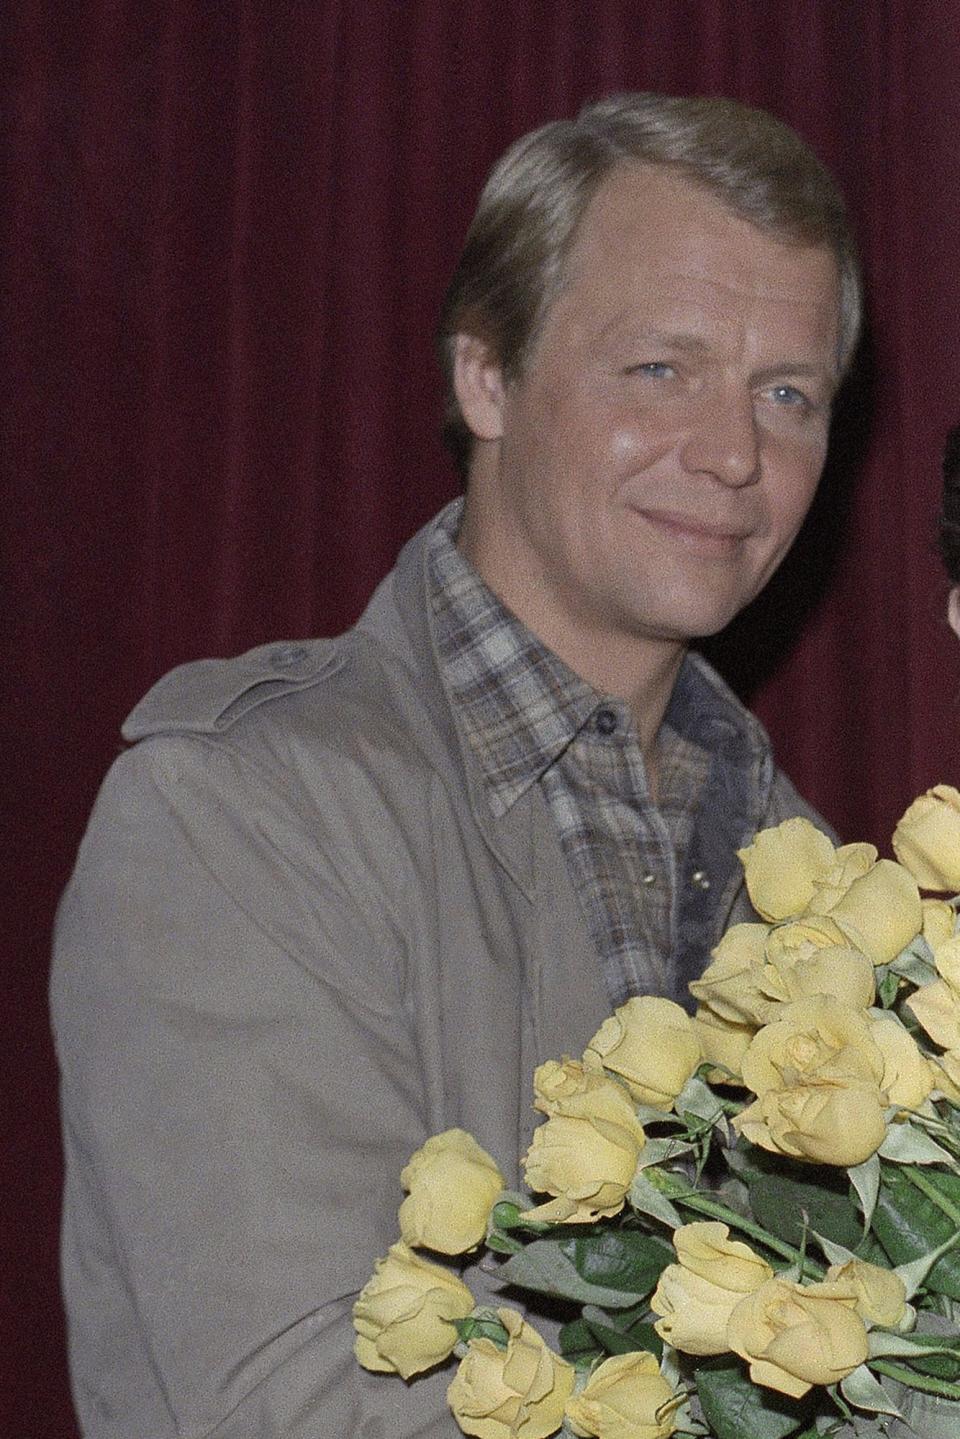 David Soul is photographed at an event in Los Angeles, Dec. 6, 1983. Soul, who hit fame as blond half of crime-fighting duo "Starsky and Hutch" in a popular 1970s television series, has died. He was 80. Wife Helen Snell, said Friday, Jan. 5, 2024, that Soul died the day before "after a valiant battle for life in the loving company of family."